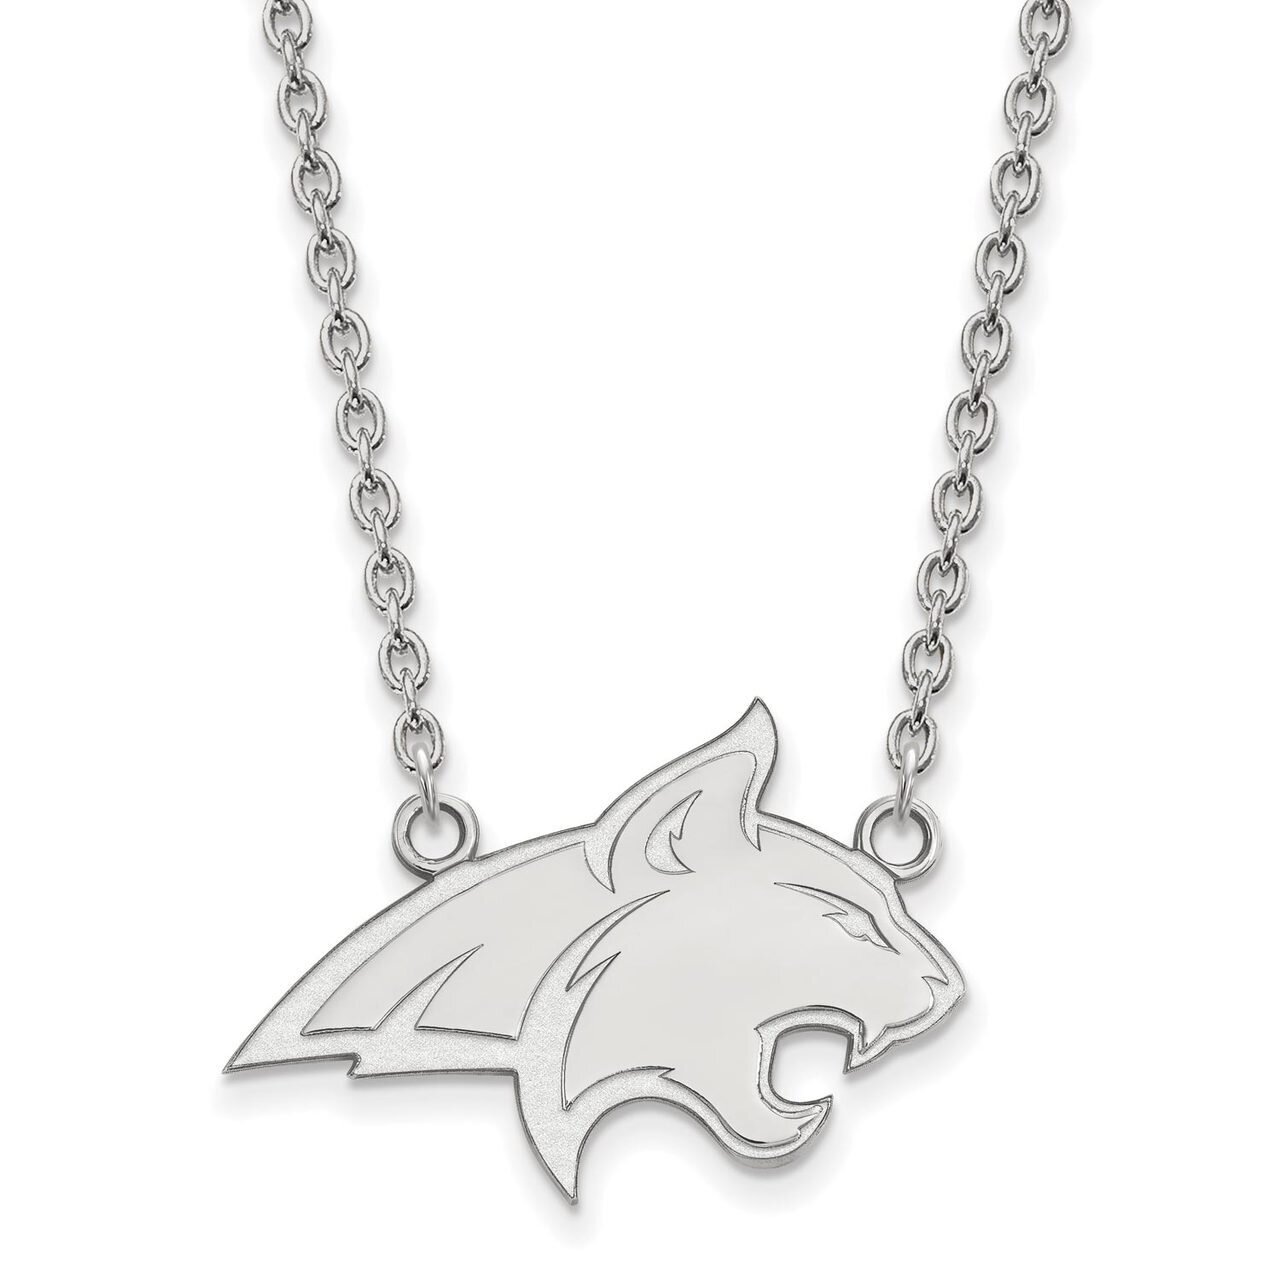 Montana State University Large Pendant with Chain Necklace 14k White Gold 4W010MTU-18